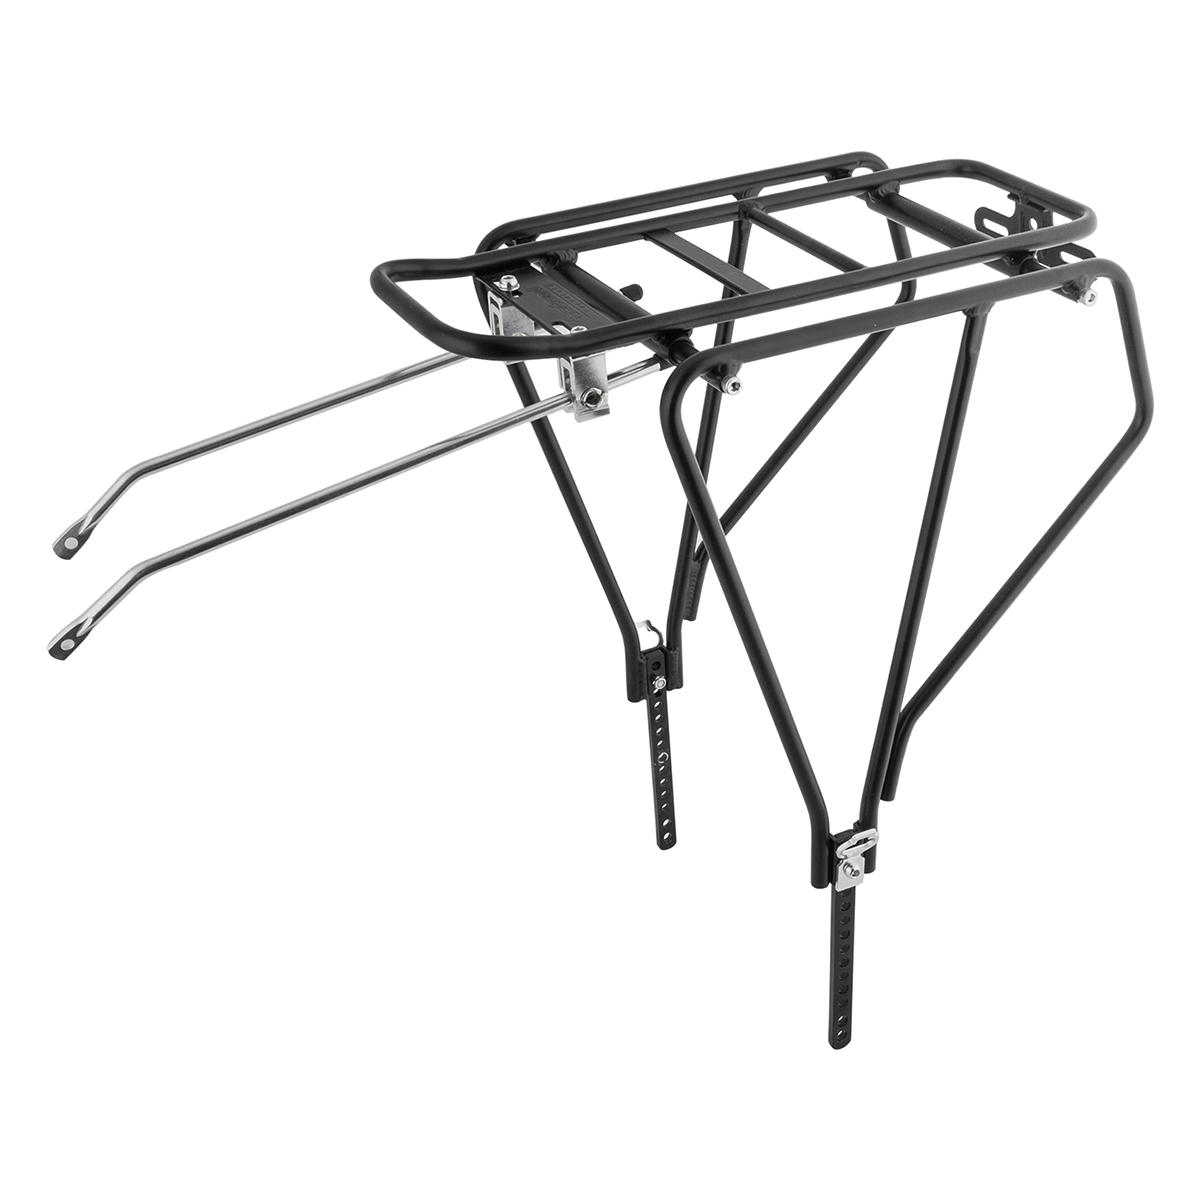 spannend aardolie Overleving Sunlite Multi-Fit Rack - Pure Ride Cycles - Lake Forest Bike Shop